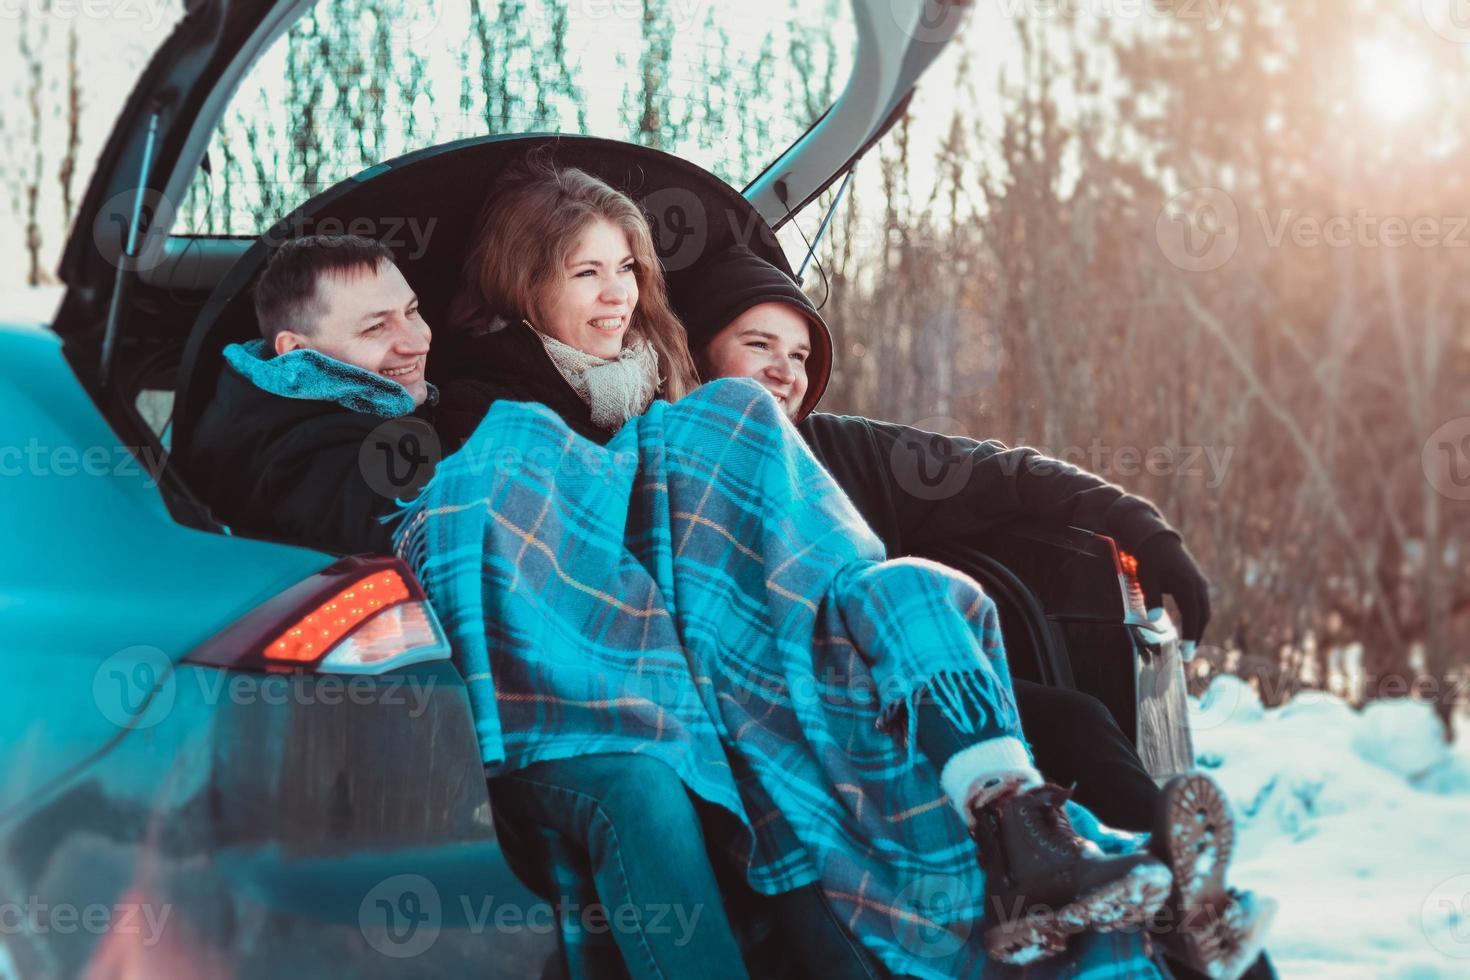 Enjoying road trip with best friends. Group of young cheerful people photo